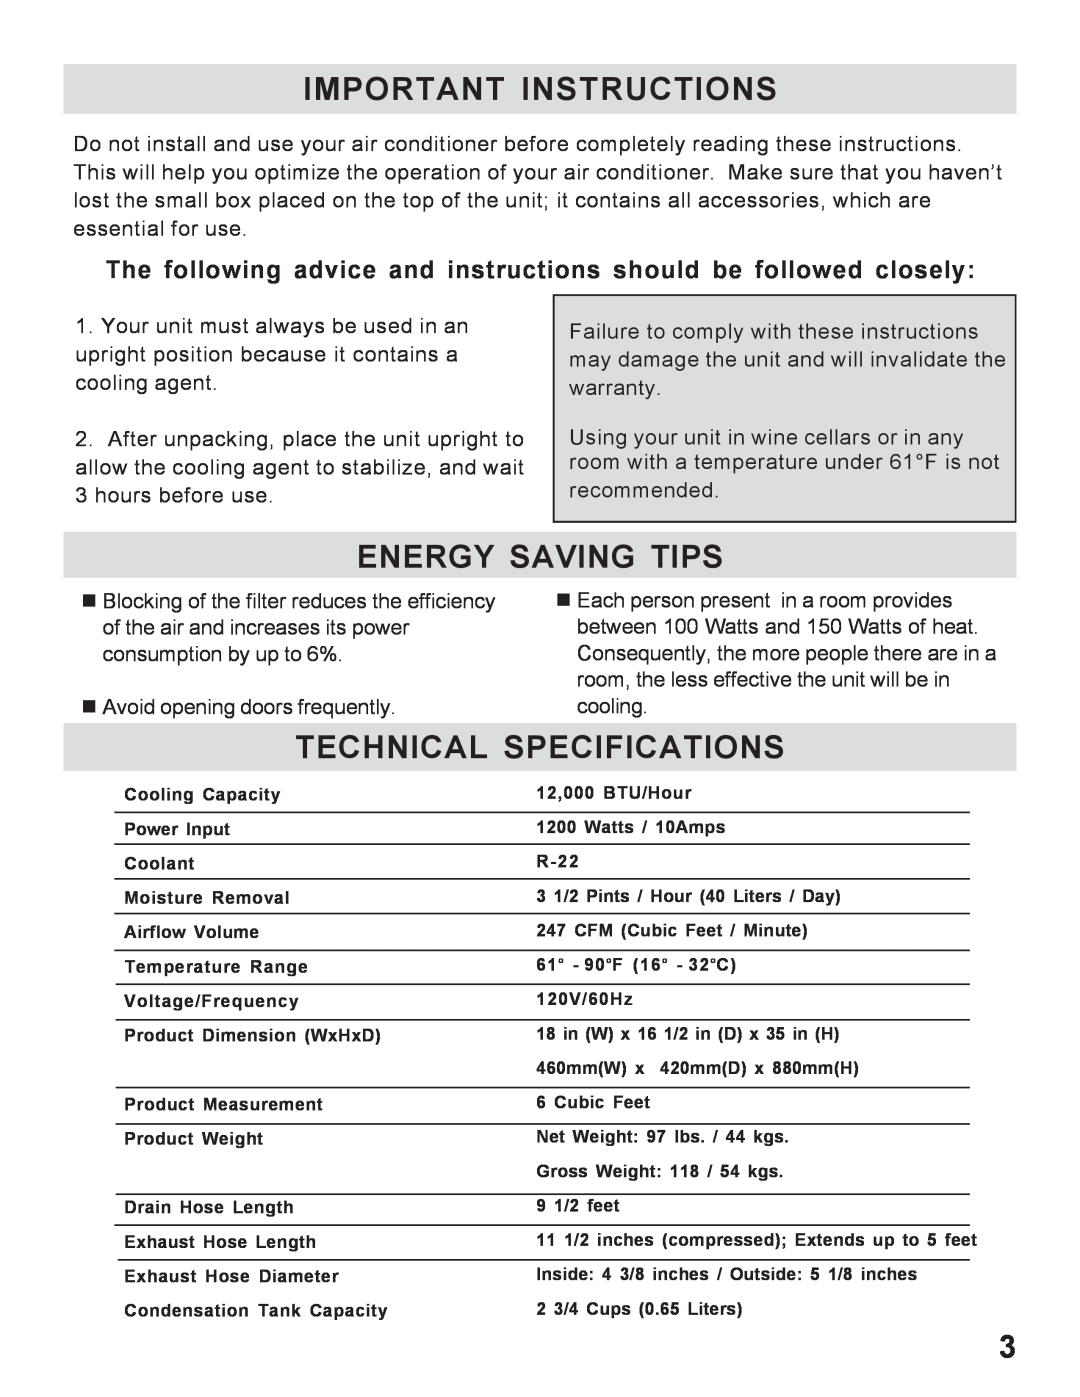 WindChaser Products PACR12 Important Instructions, Energy Saving Tips, Technical Specifications, consumption by up to 6% 